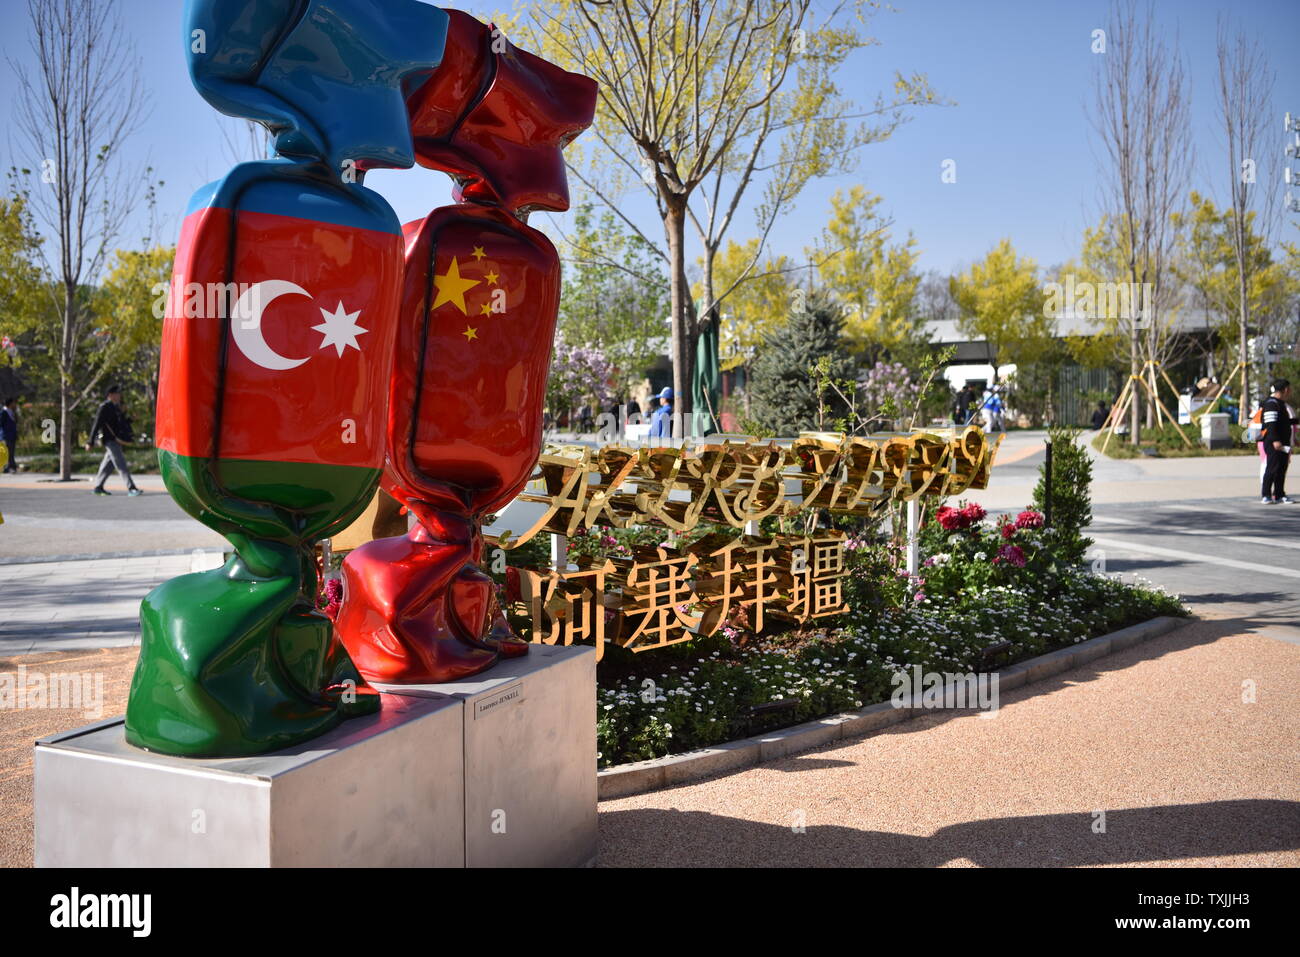 Photographed at the World Horticultural Expo in Beijing on April 30, 2019. Countries have set up their own pavilions to showcase the characteristics of their respective countries. Stock Photo